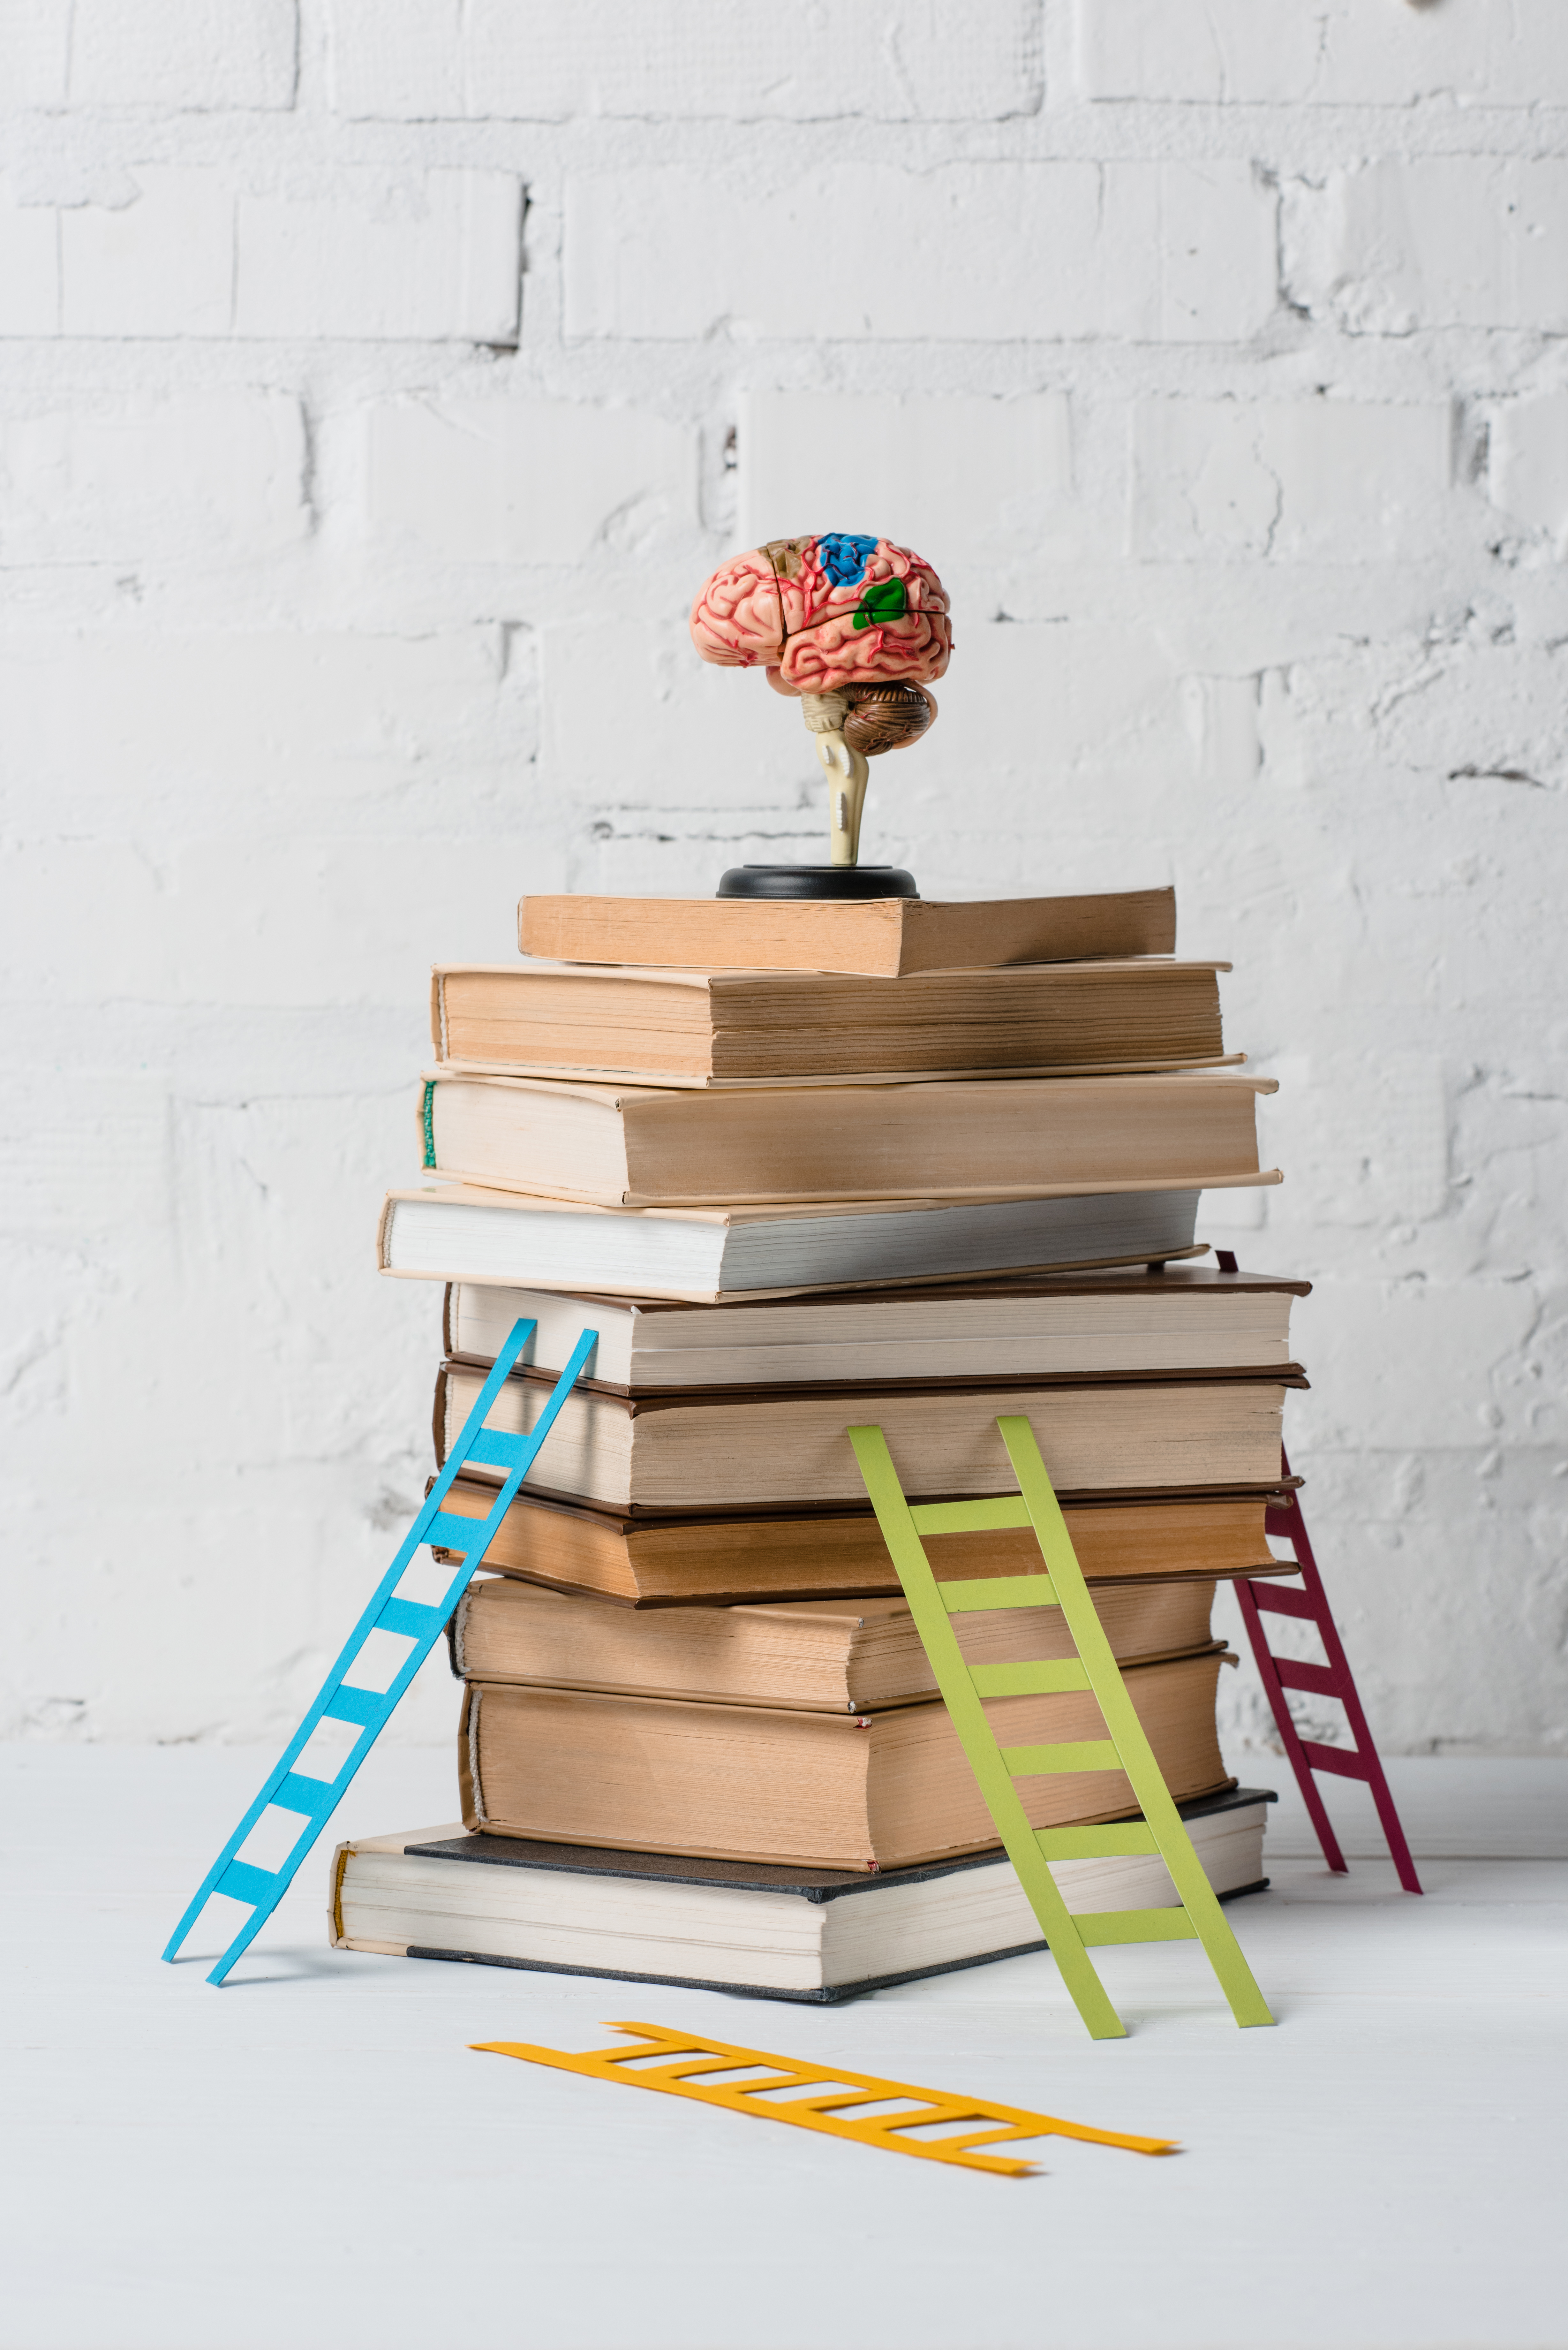 brain model on pile of books and small colorful step ladders